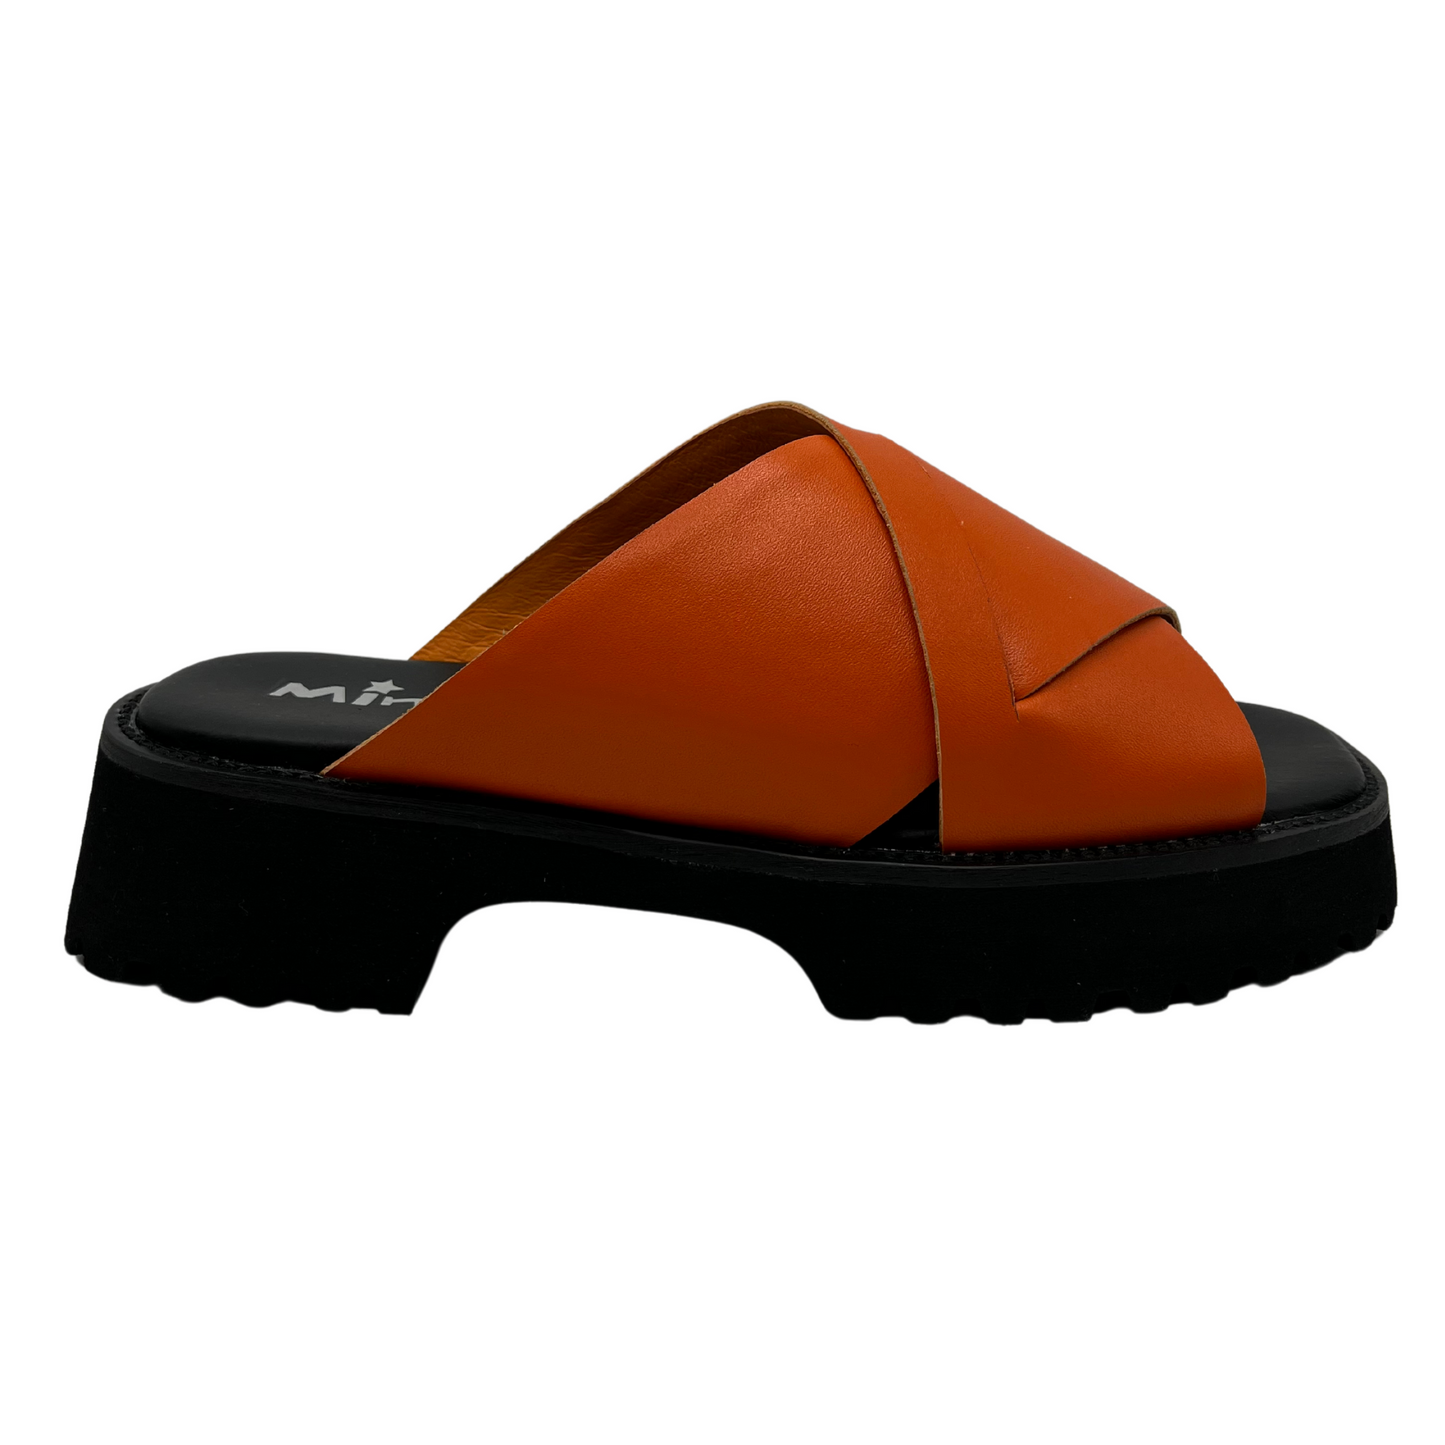 Right facing view of orange leather sandal with thick black sole, cross over straps and open toe